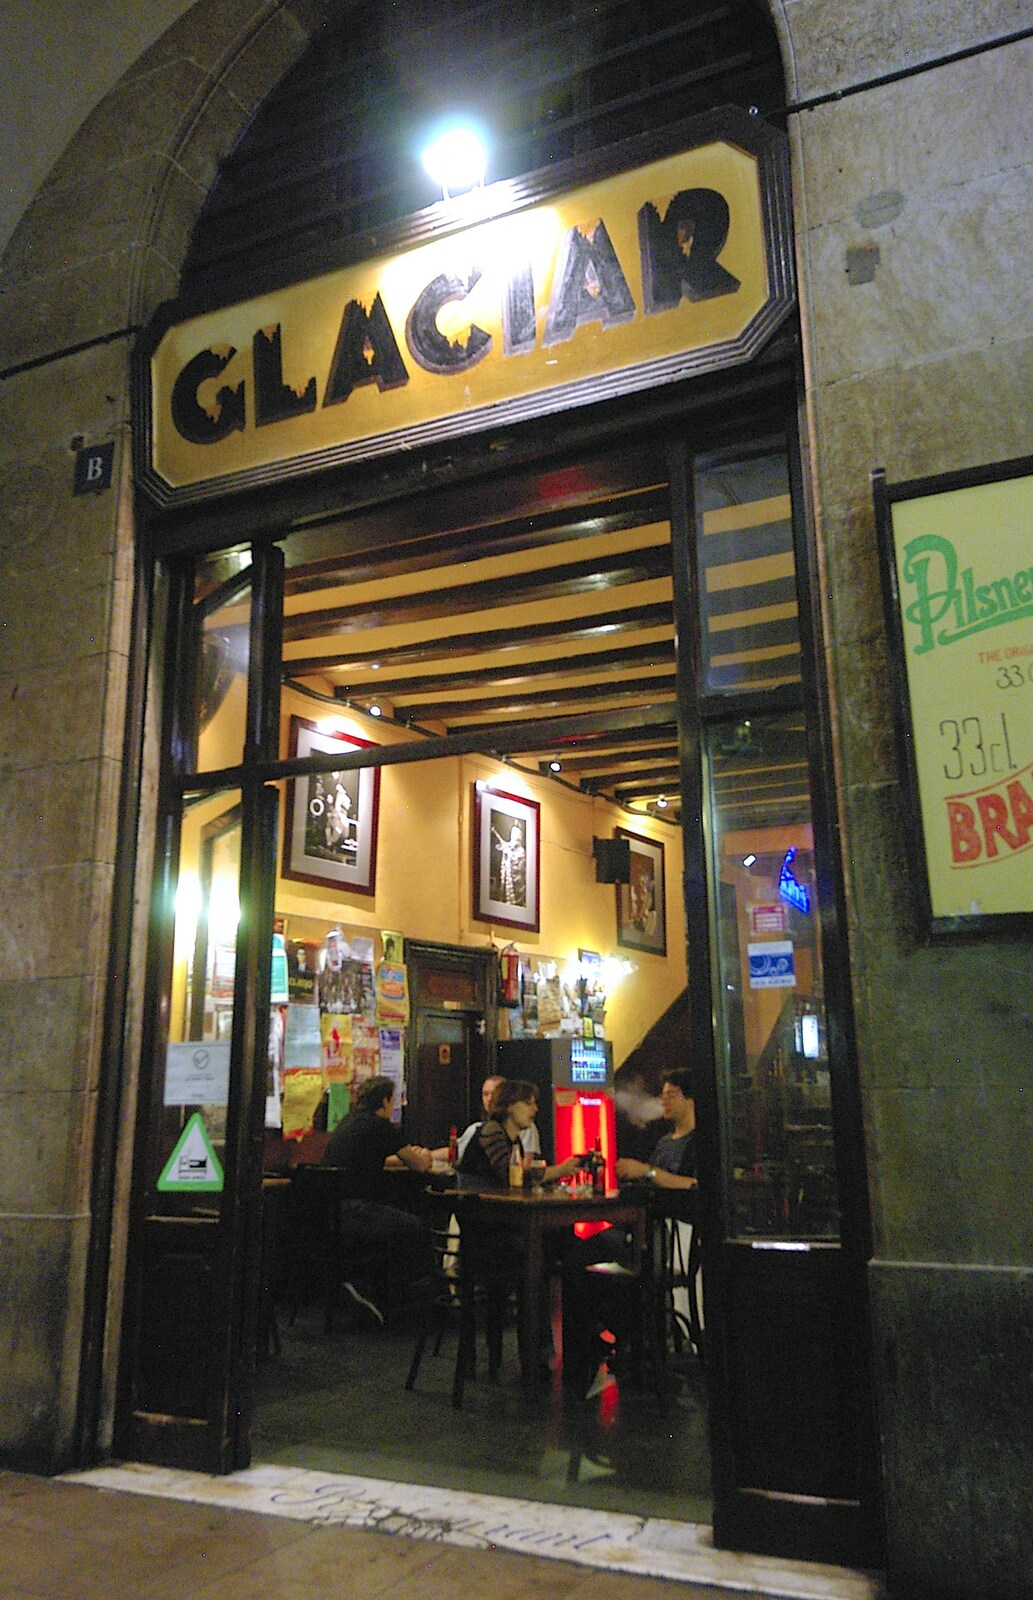 The Bar Glaciar from Two Days in Barcelona, Catalunya, Spain - 22nd September 2006